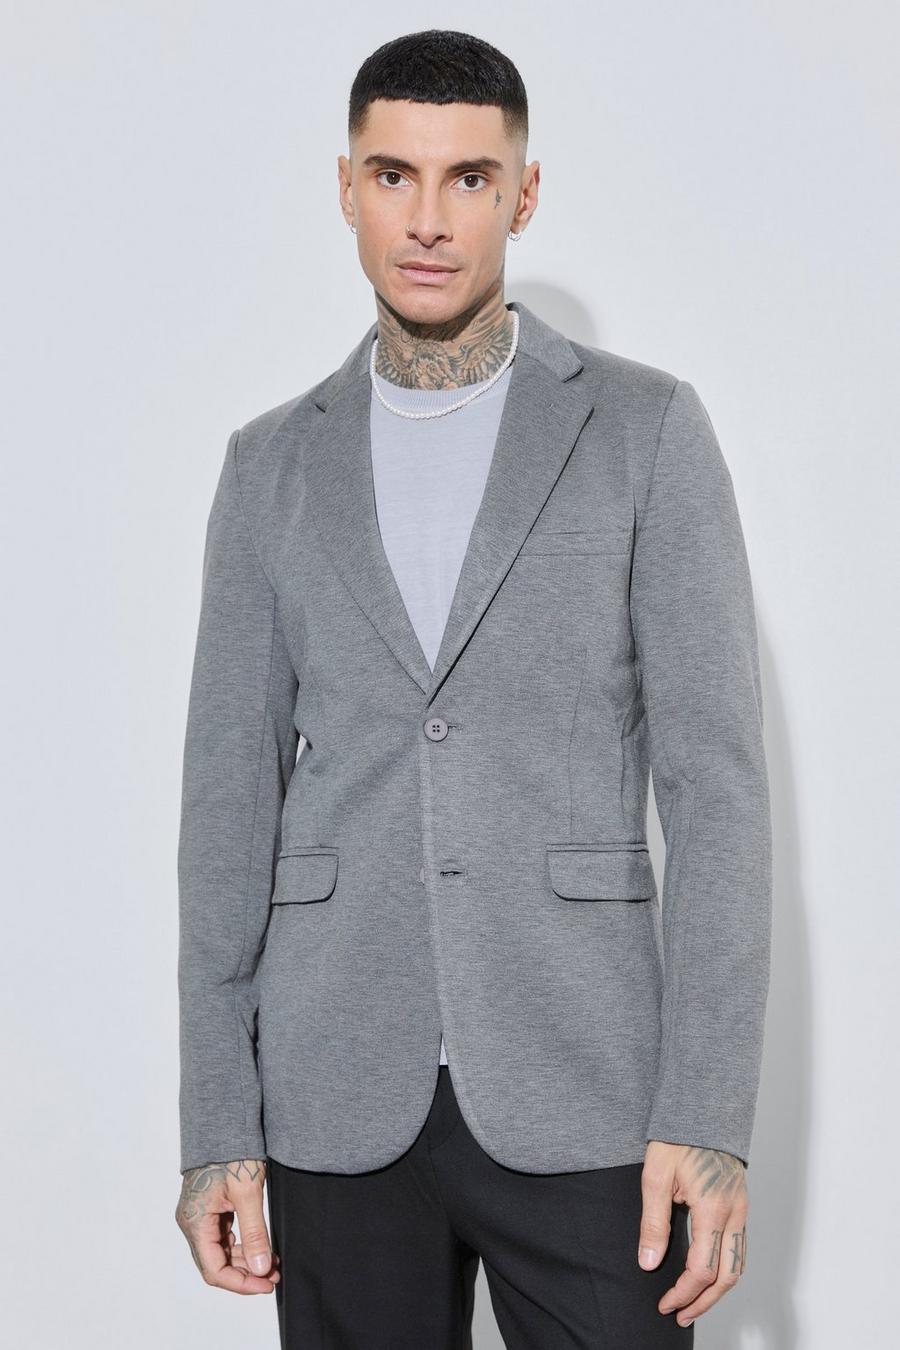 Charcoal grey Tall Skinny Fit Single Breasted Jersey Blazer